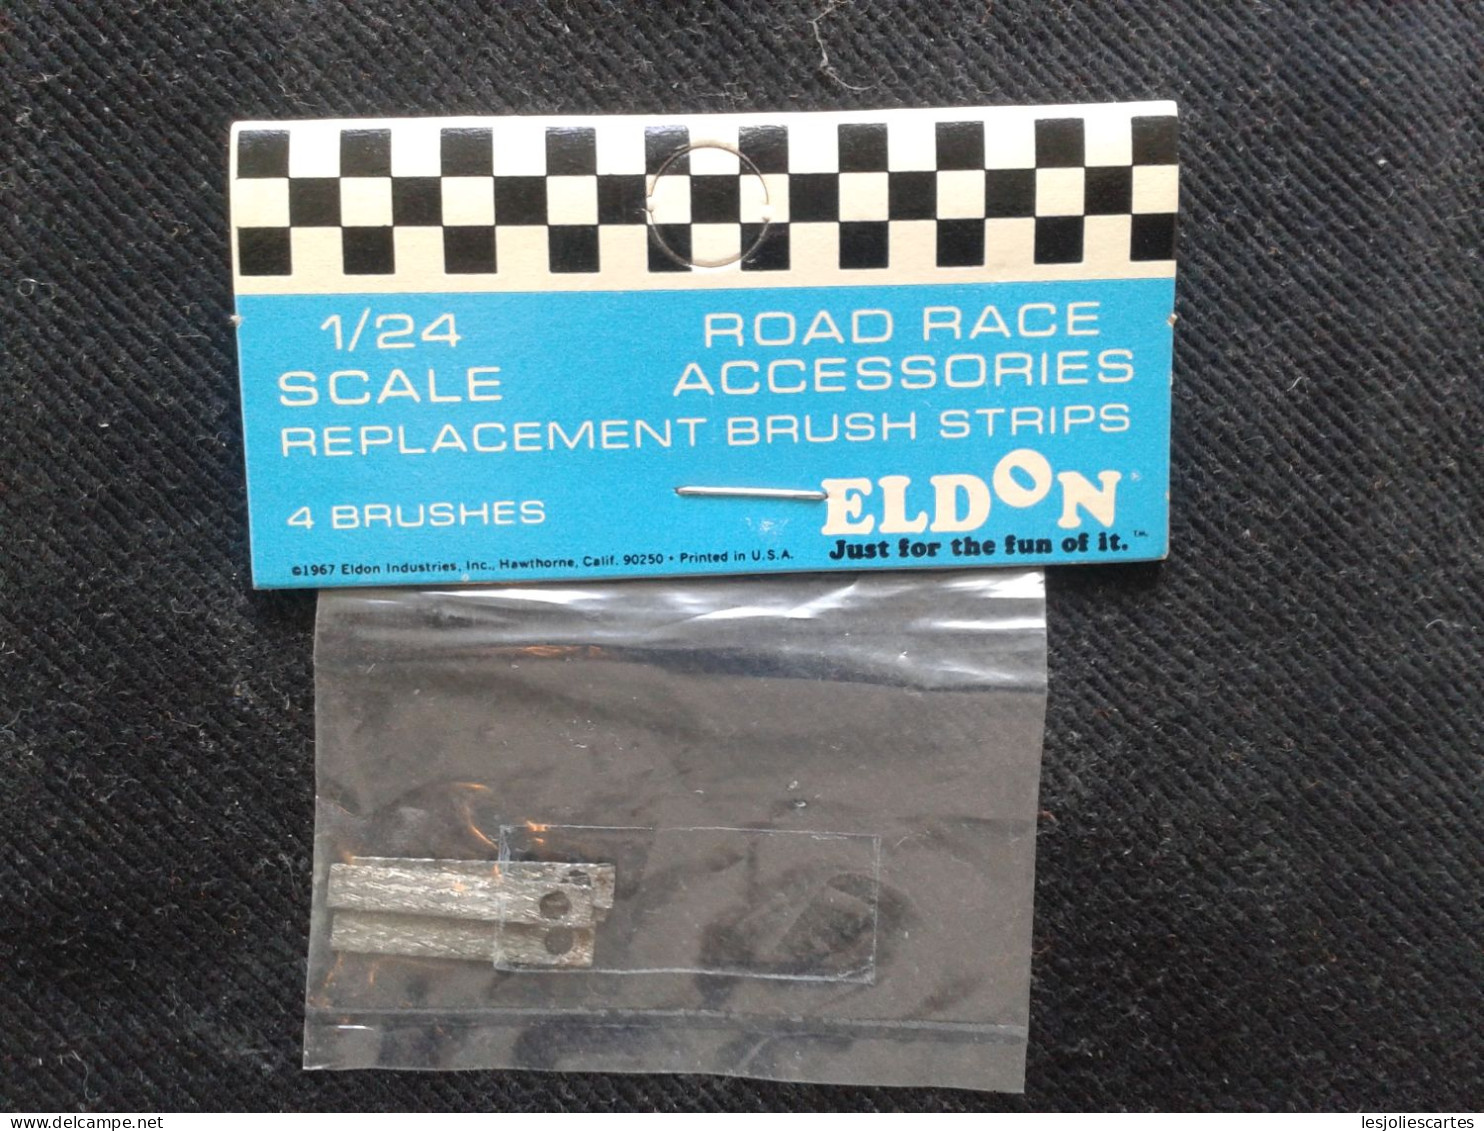 Eldon Replacement Brush Strips Road Race Accessories 1/24 - Circuits Automobiles